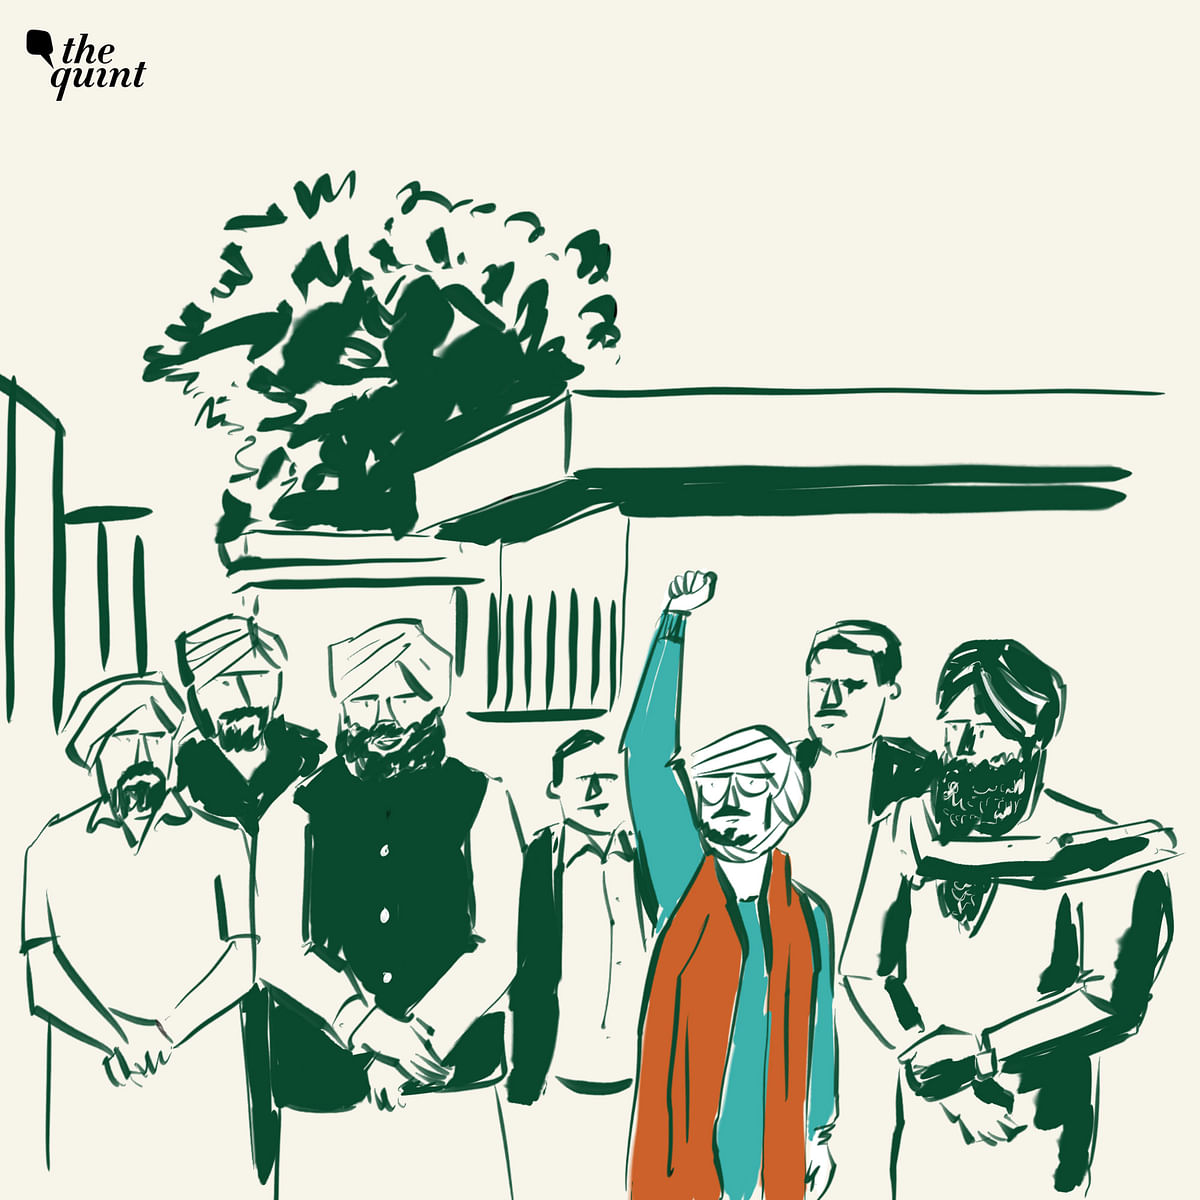 Shiv Kumar was at the forefront of the year-long protests against the three farm laws passed by the Modi government.